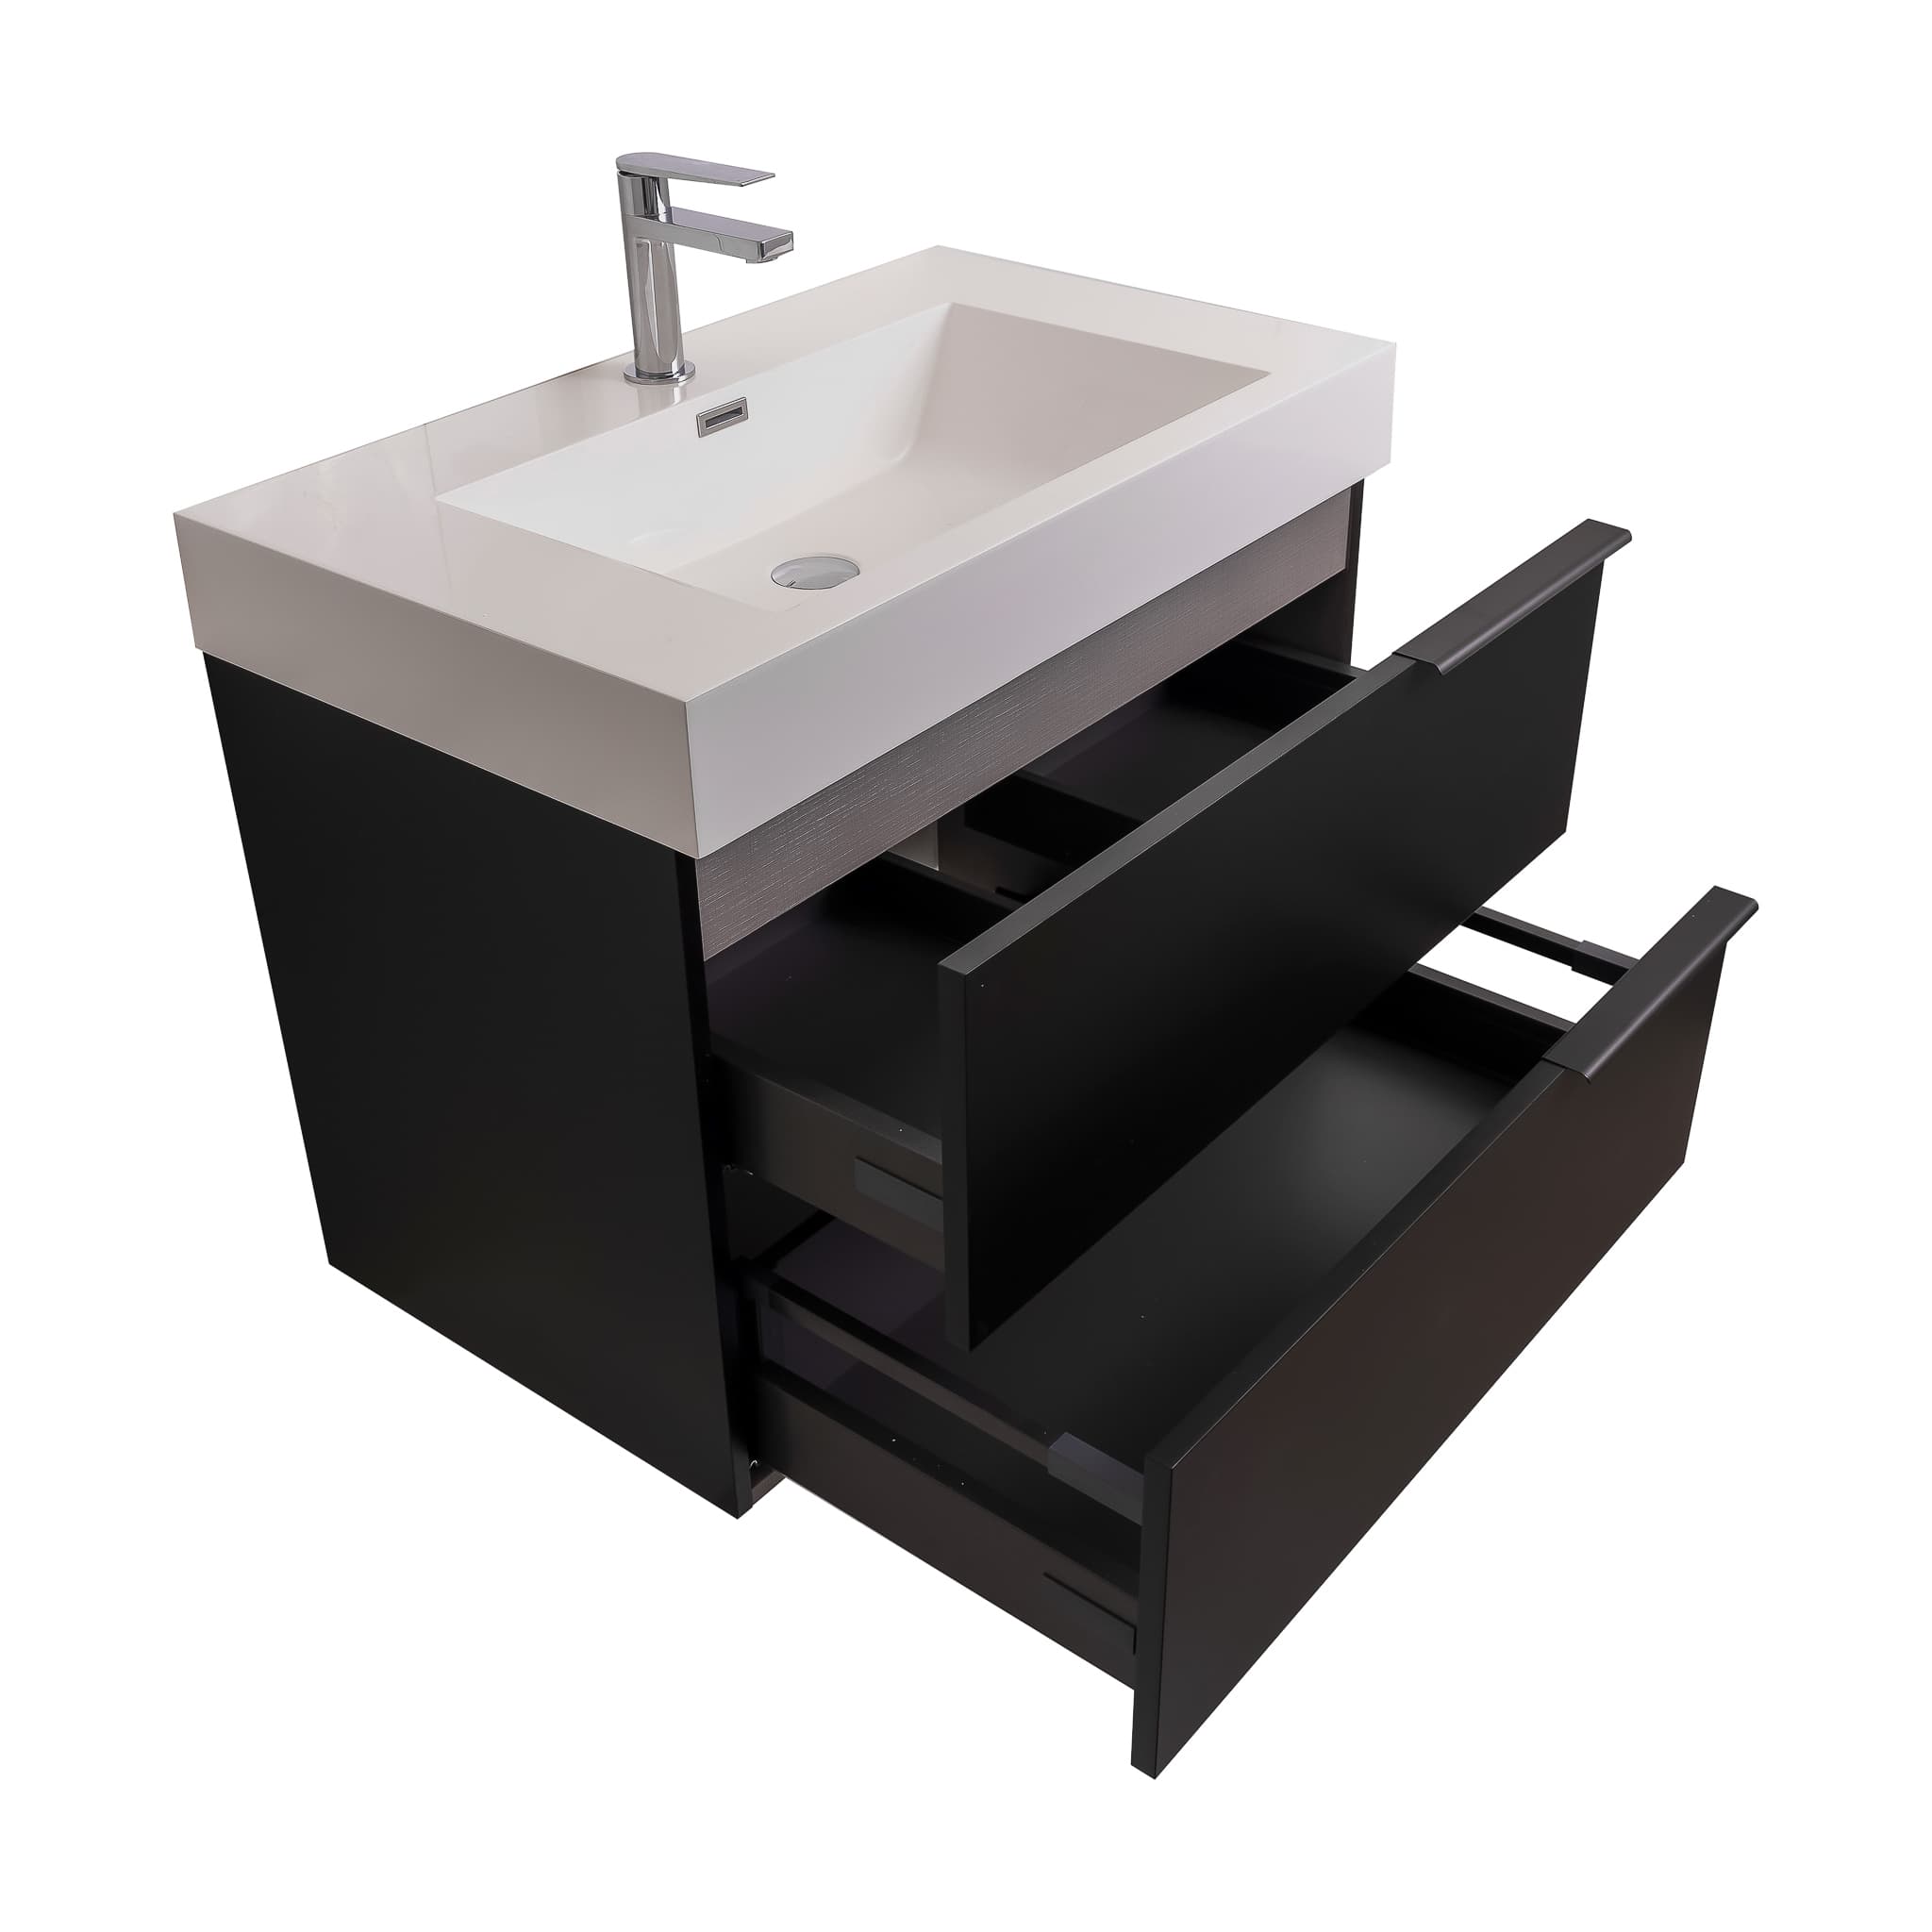 Mallorca 39.5 Matte Black Cabinet, Square Cultured Marble Sink, Wall Mounted Modern Vanity Set